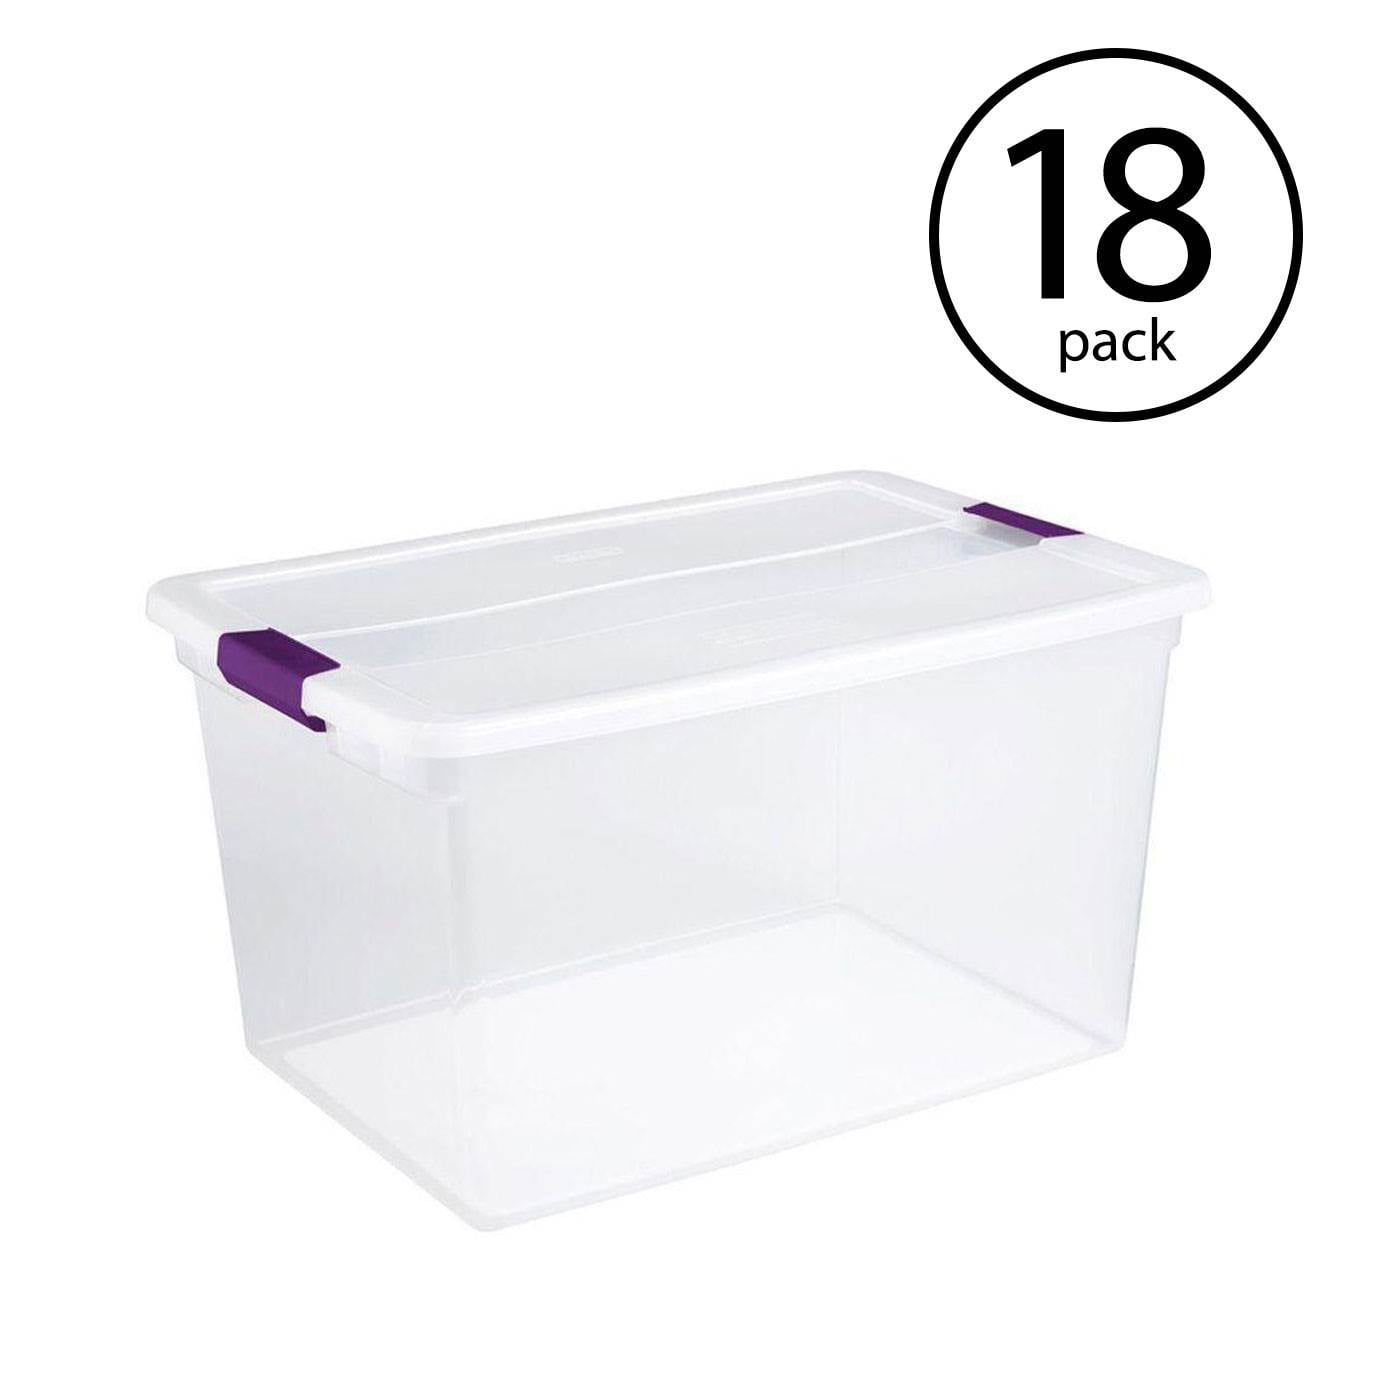 Sterilite 17571706 66 Quart ClearView Latch Box Storage Tote Container, 18 Pack